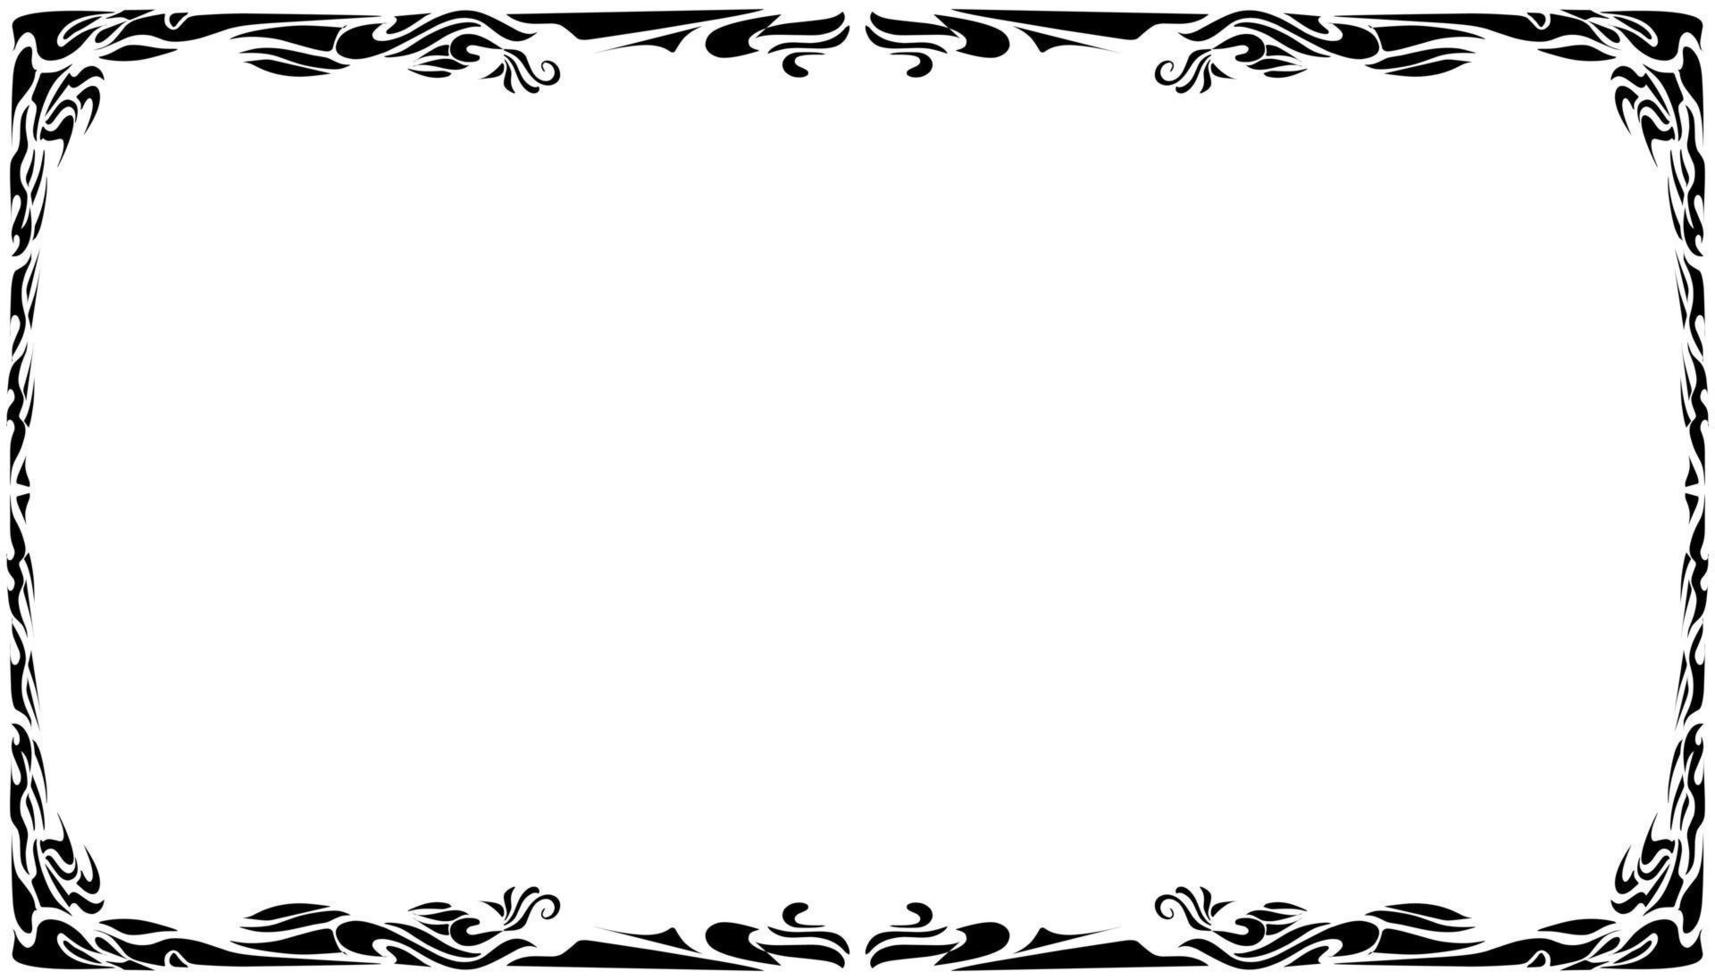 Illustration of a photo frame with a tribal design vector